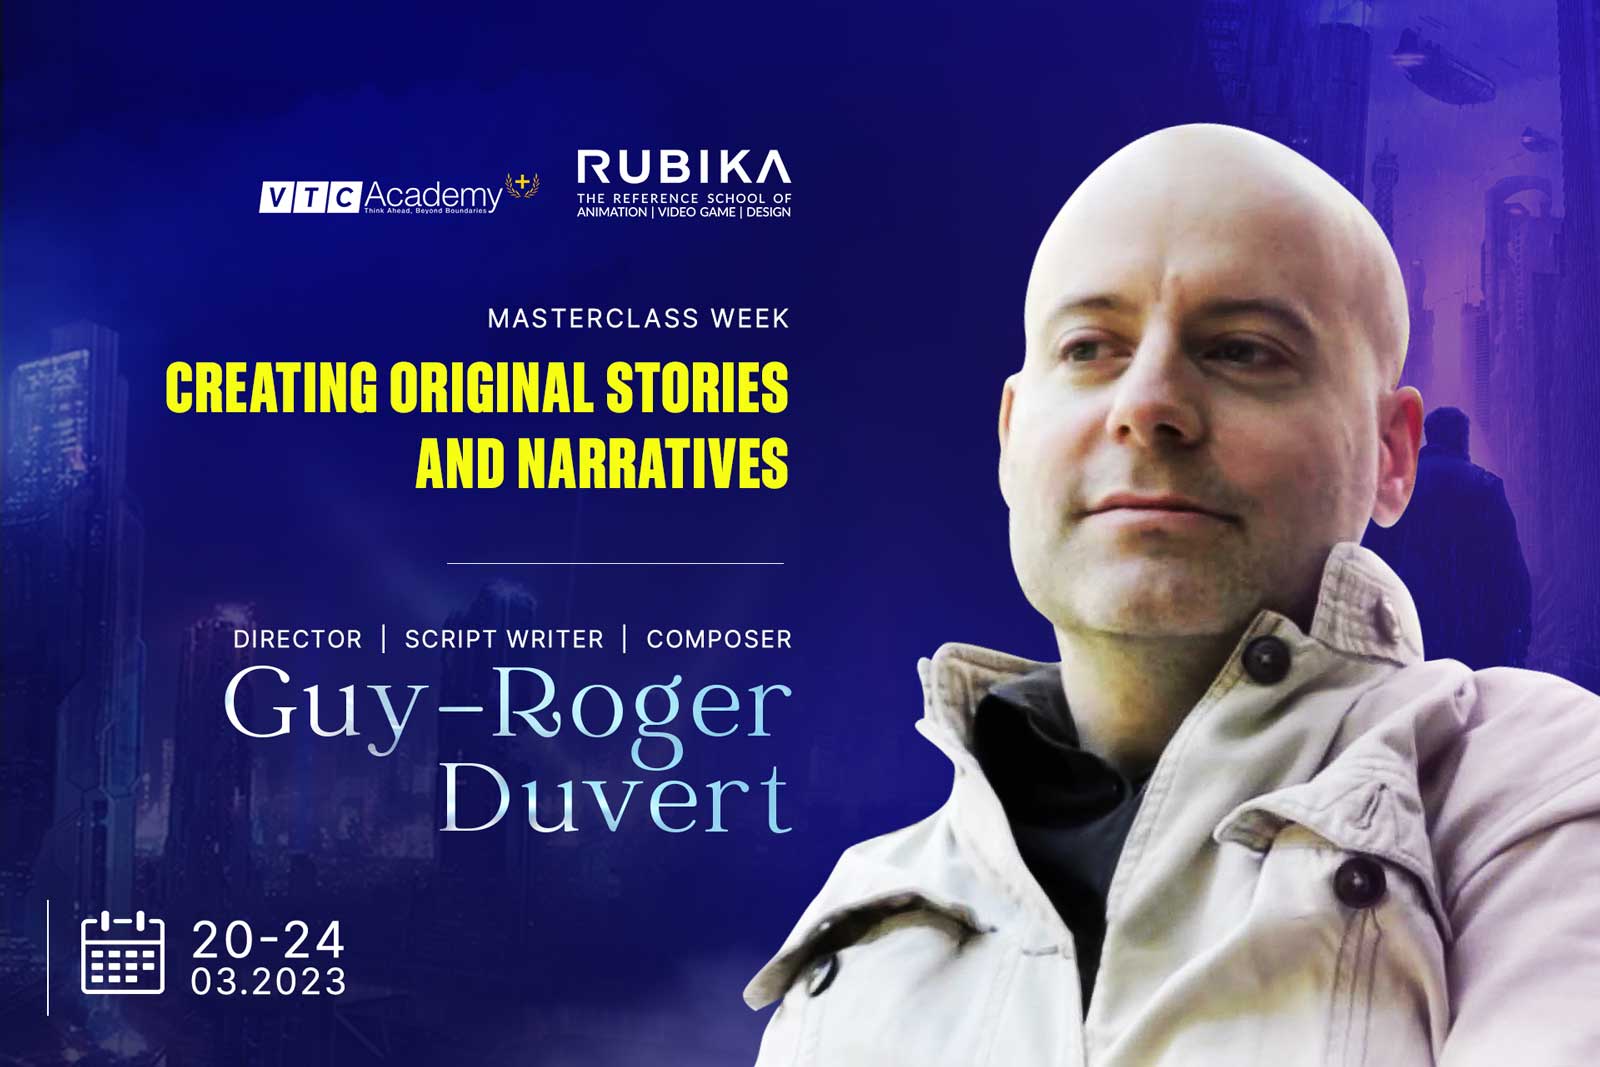 Masterclass week: Creating original stories and narratives with French director Guy-Roger Duvert.